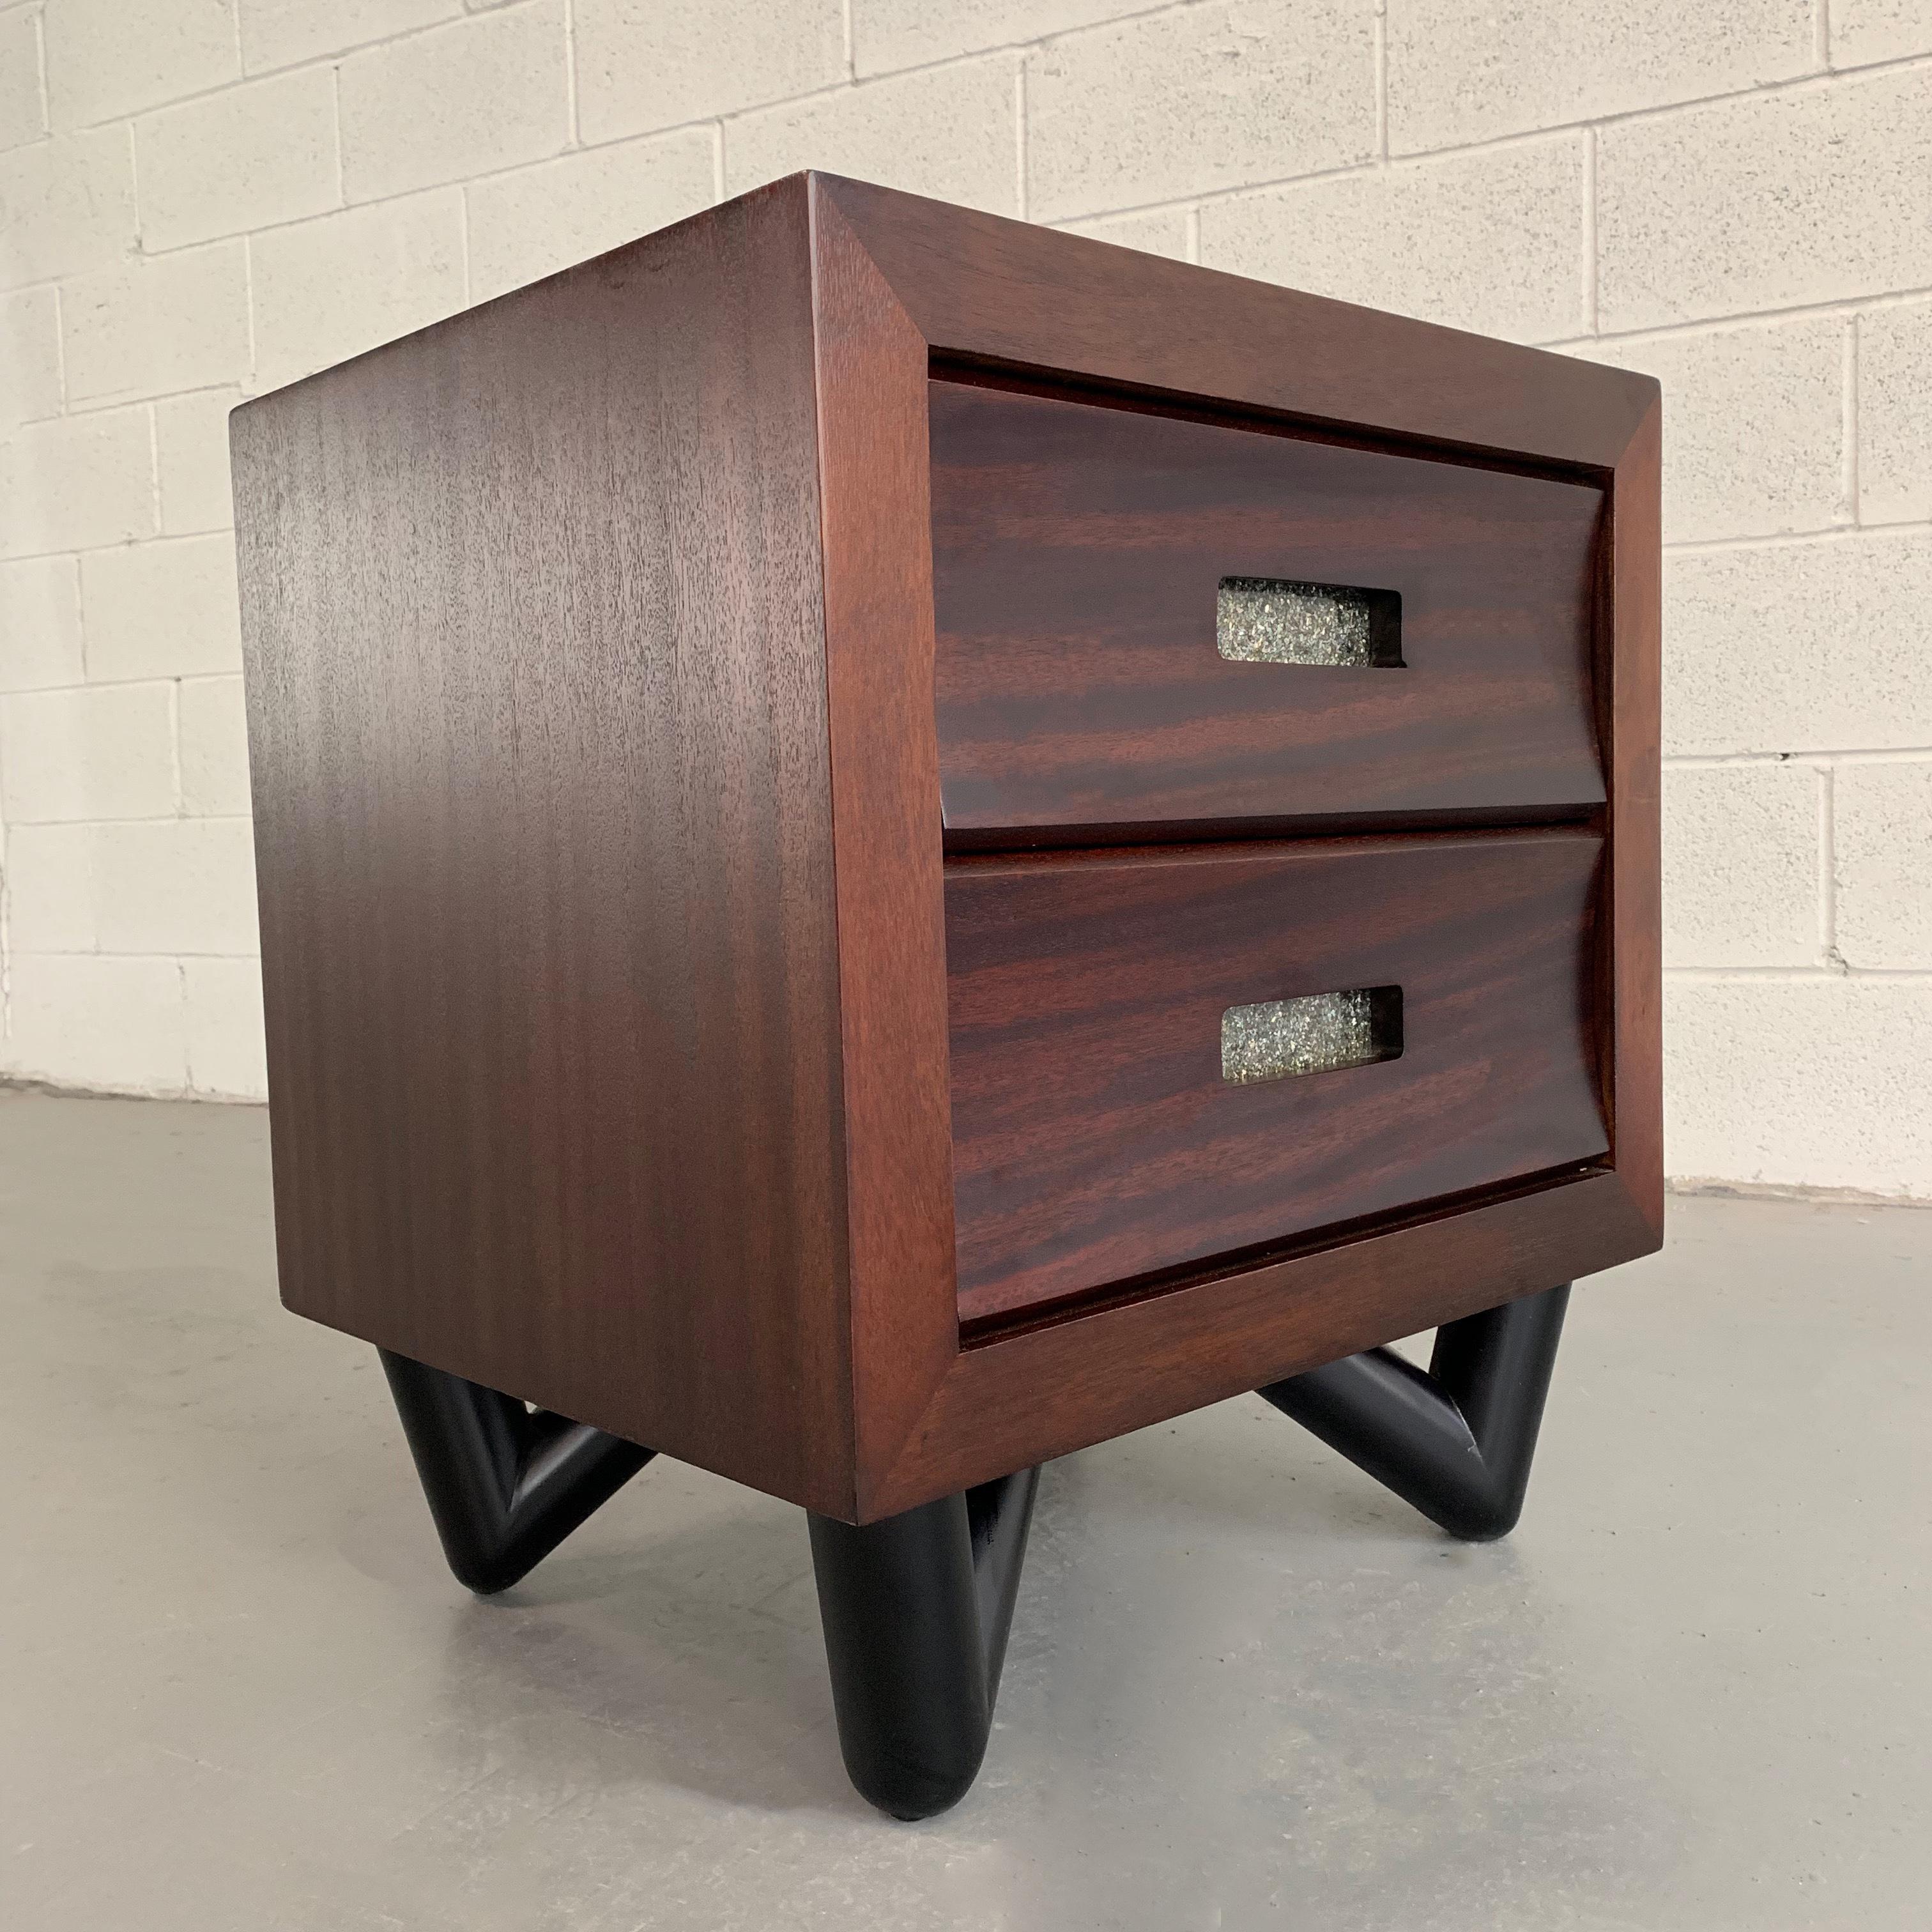 Single, petite, Mid-Century Modern dresser or nightstand or end table features a walnut cabinet with sculpted, lacquered maple base and mother of pearl inserts on the handles. The 2 interior heights of the drawers is 5.5 inch on the bottom and 5